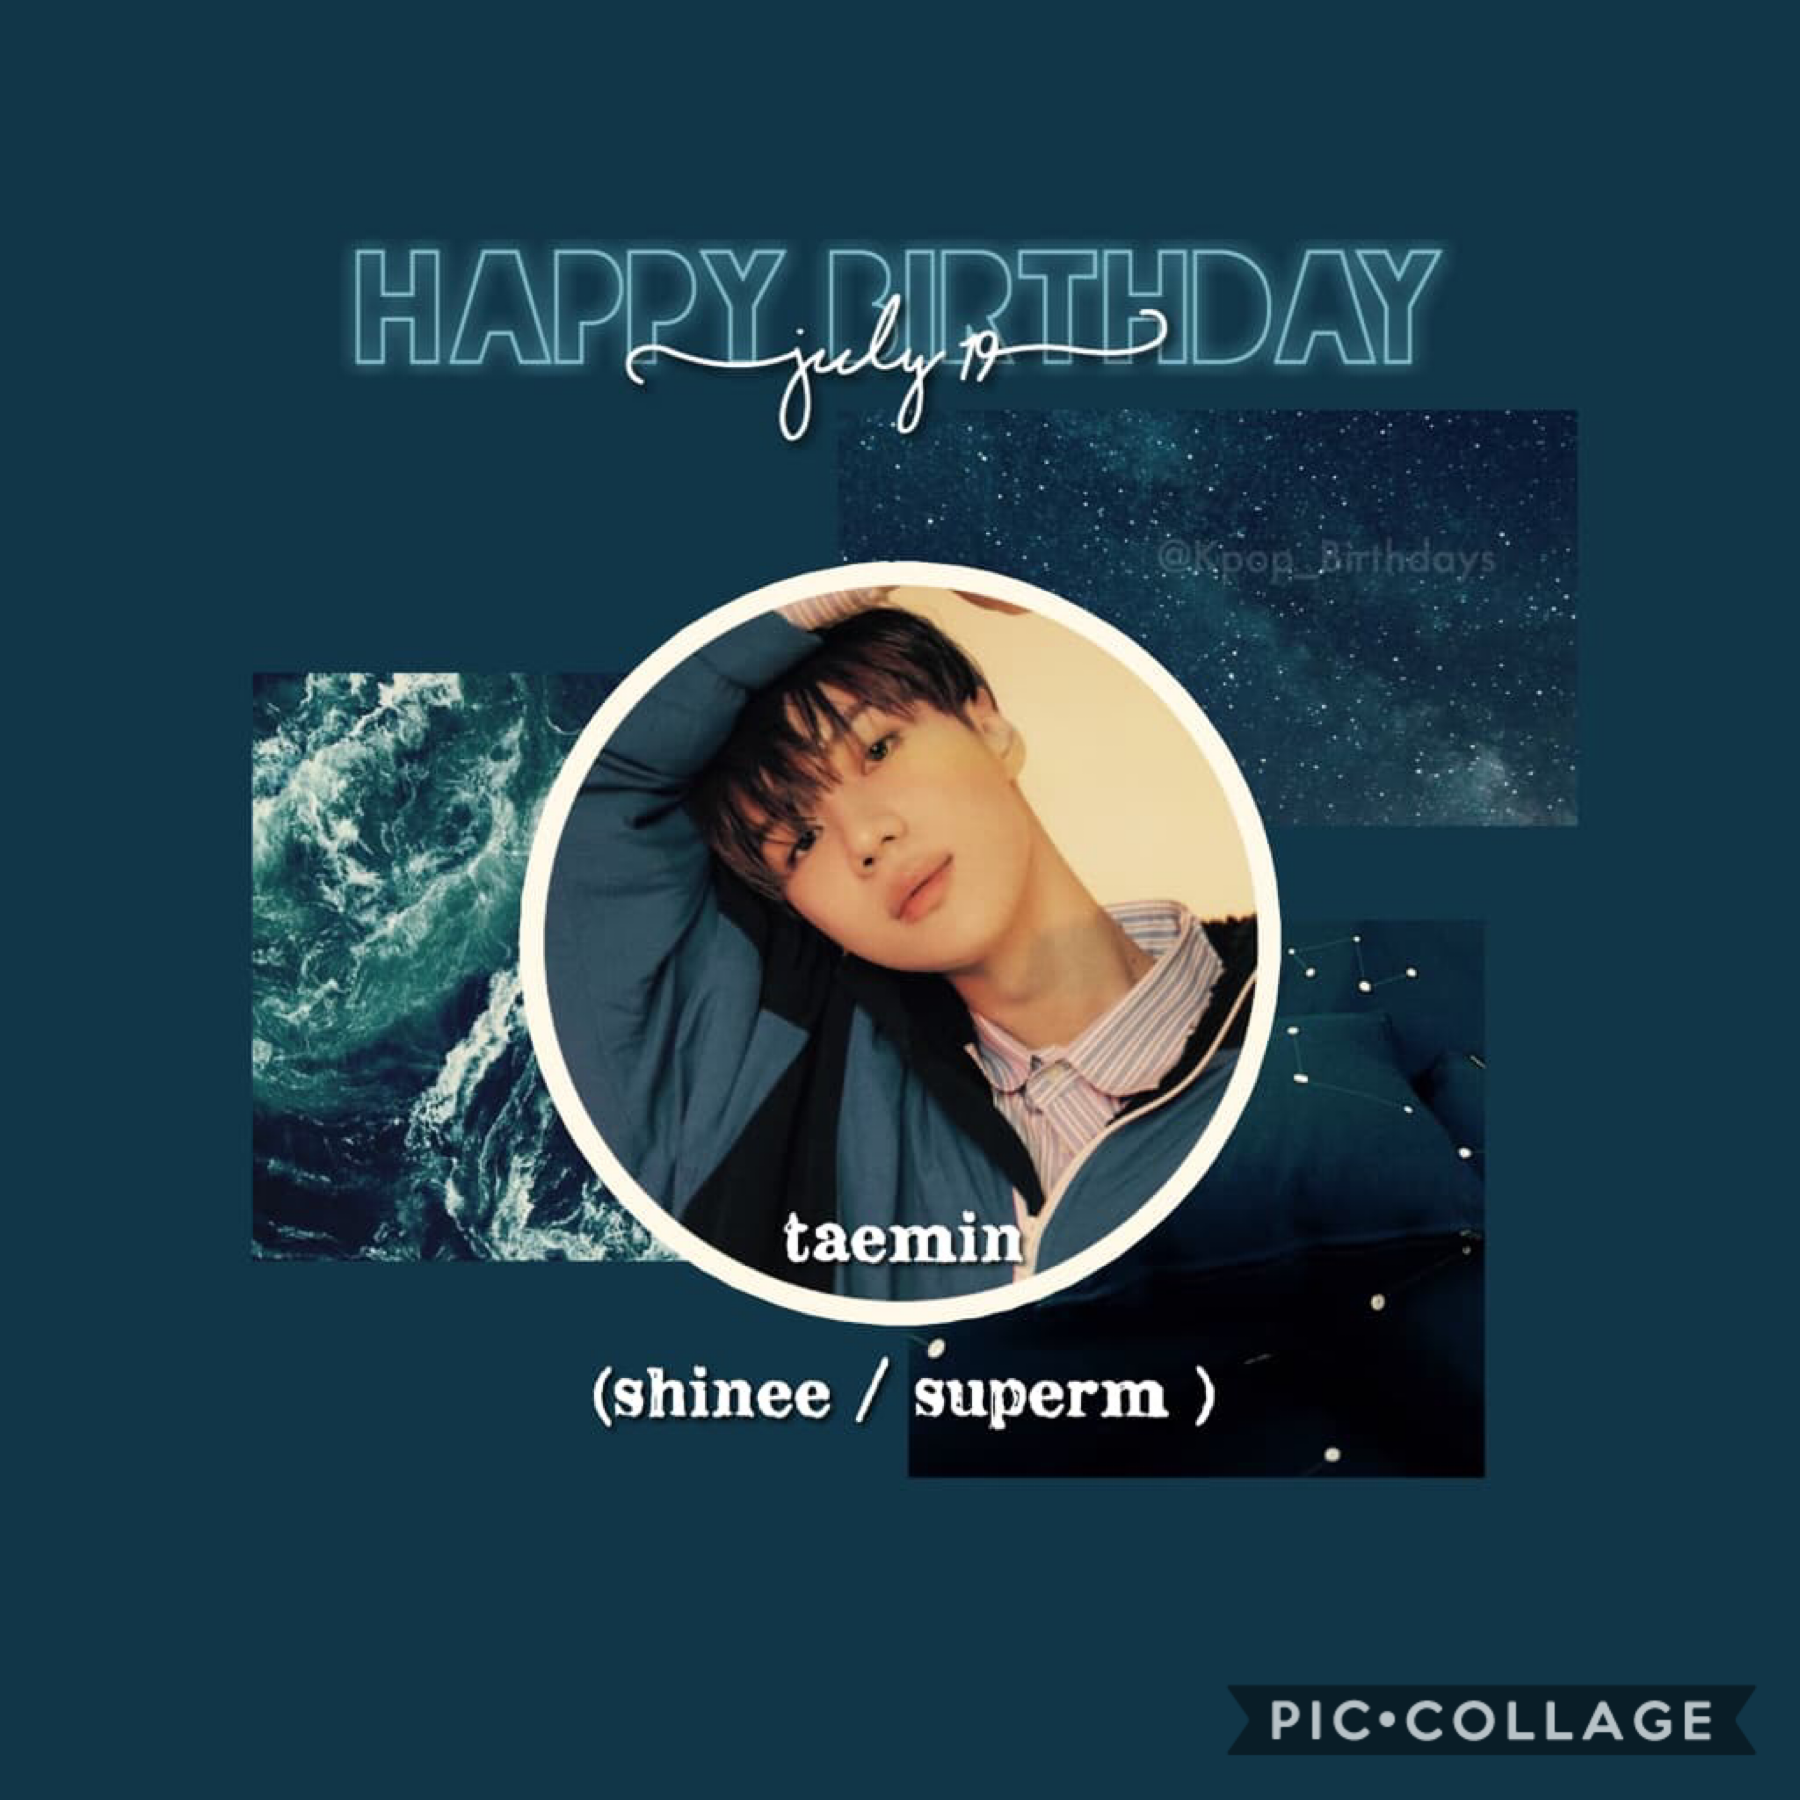 •🌻🍃•
sorry for this being kinda late, my sched was hectic yesterday, but happy birthday taemin!! 🥳 y’all his stage presence is no joke 🤩
Other birthdays:
•1TEAM’s BC~ July 18
•Weki Meki’s Elly~ July 20
🌻🍃~Drea~🍃🌻